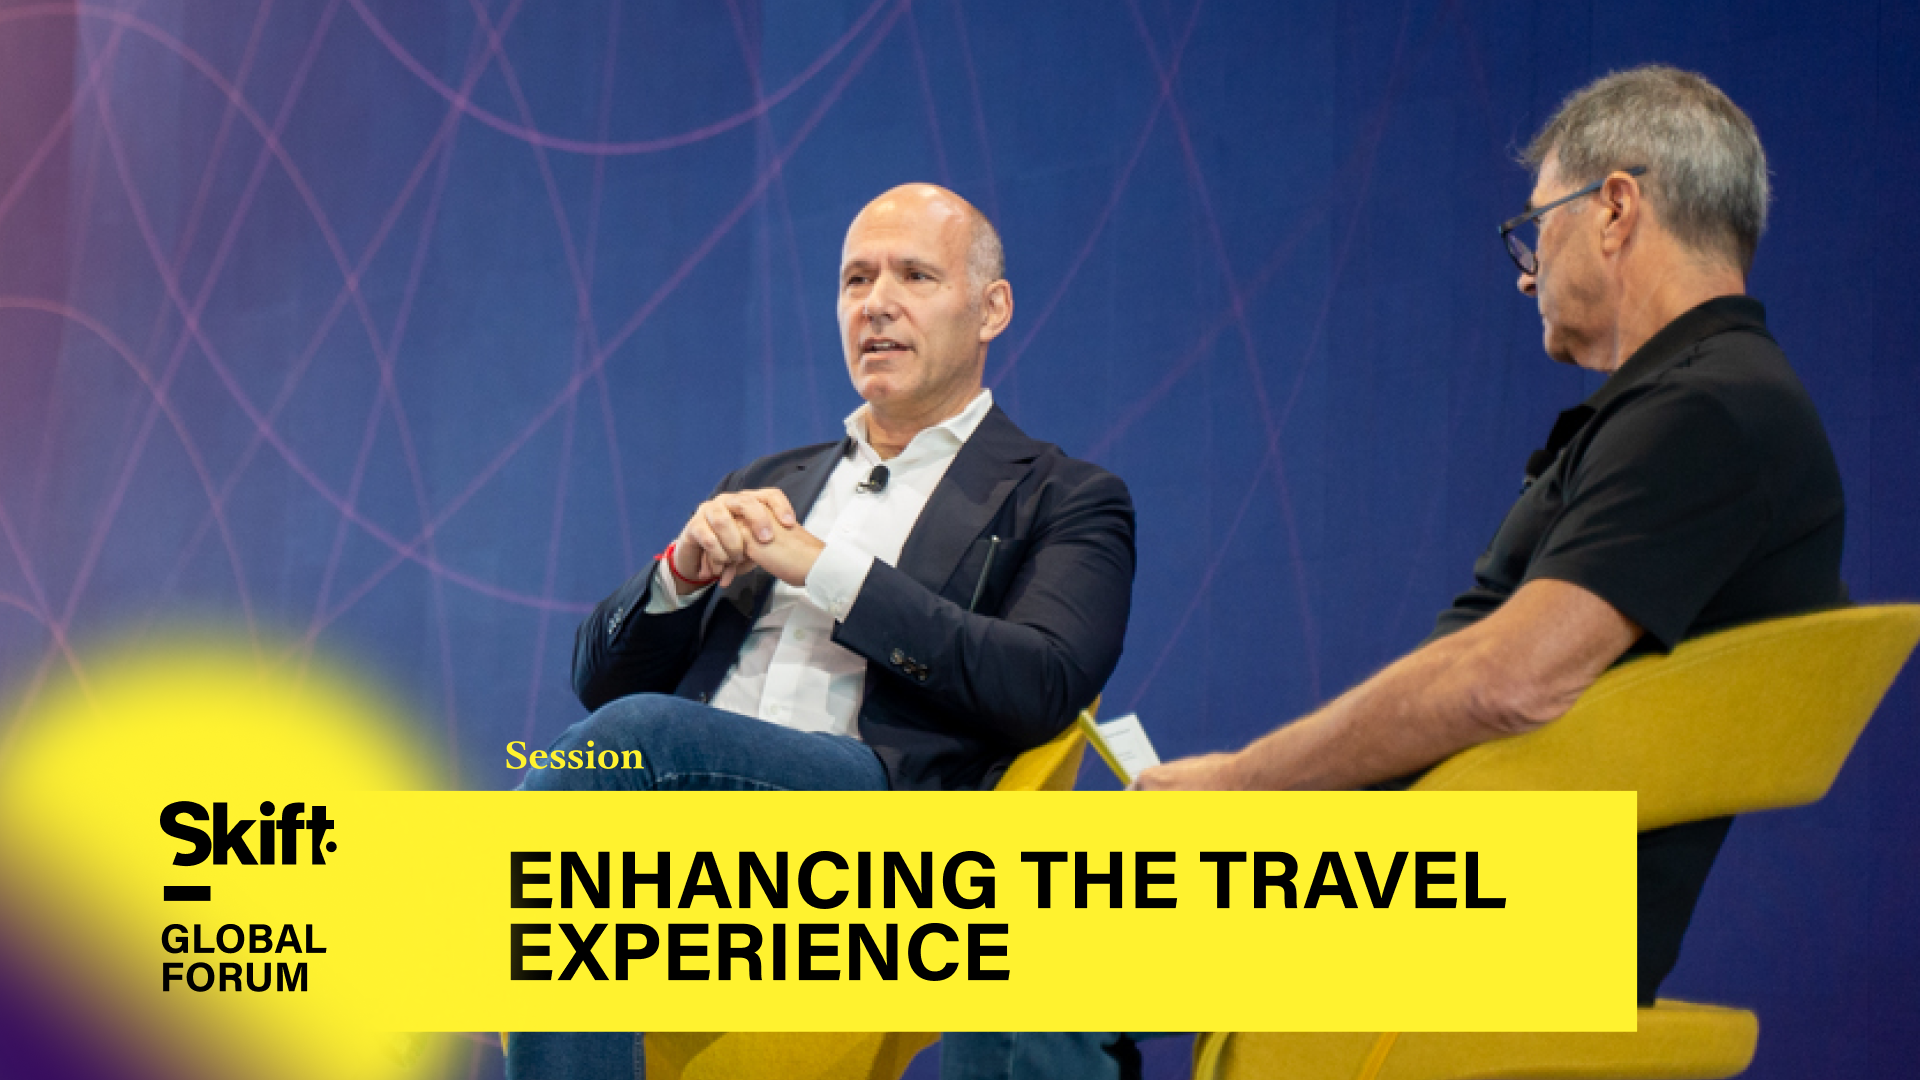 Expedia Group CEO Peter Kern in discussion with Executive Editor Dennis Schaal at the Skift Global Forum in New York City.